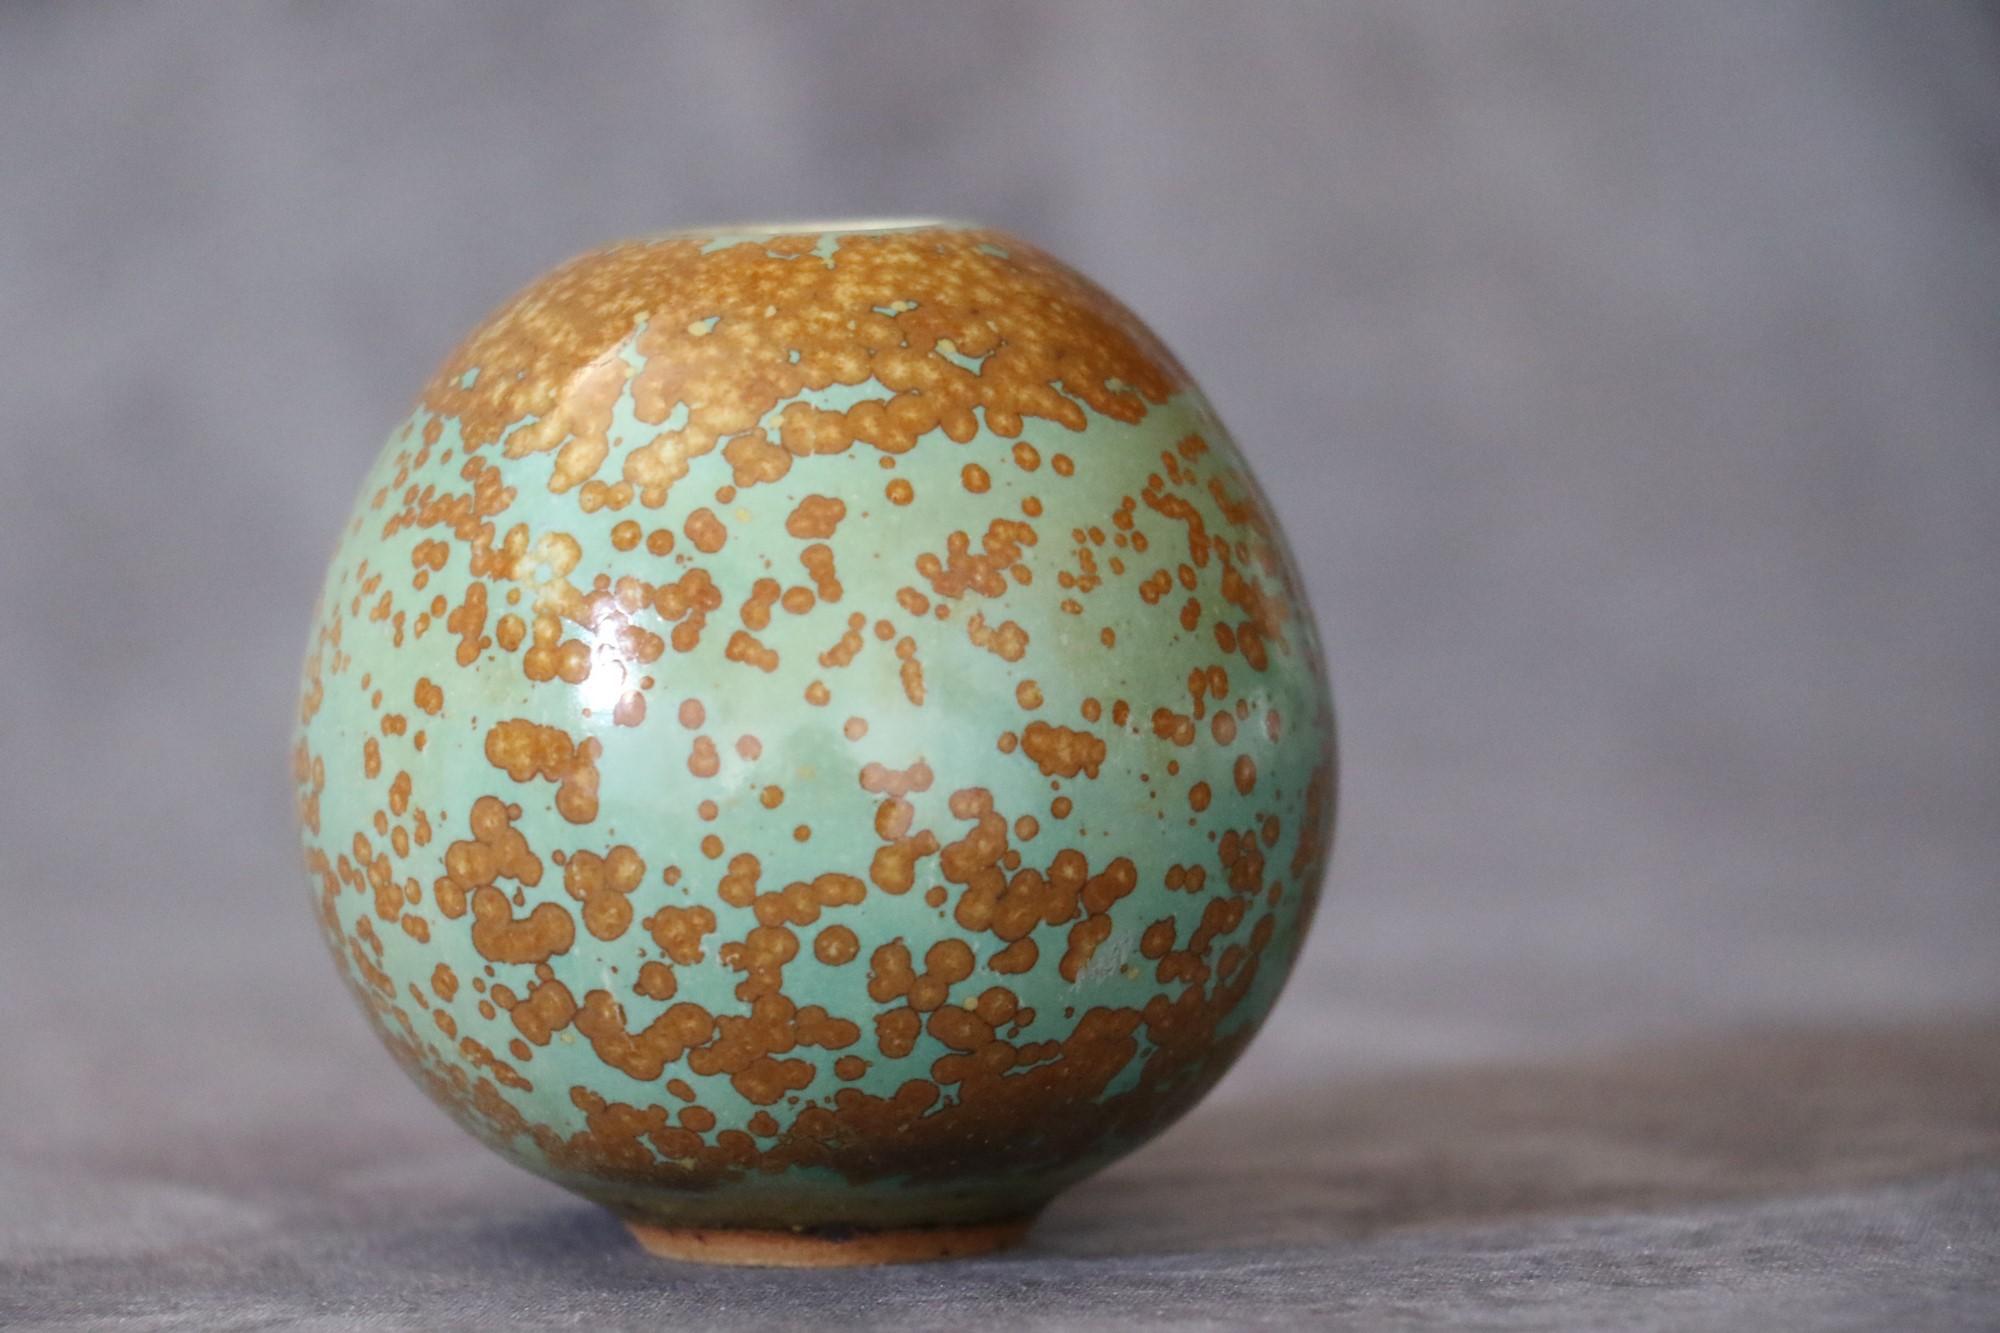 French Ceramic Ball Vase with Nucleations by Monique Cavallini - circa 2000 For Sale 5